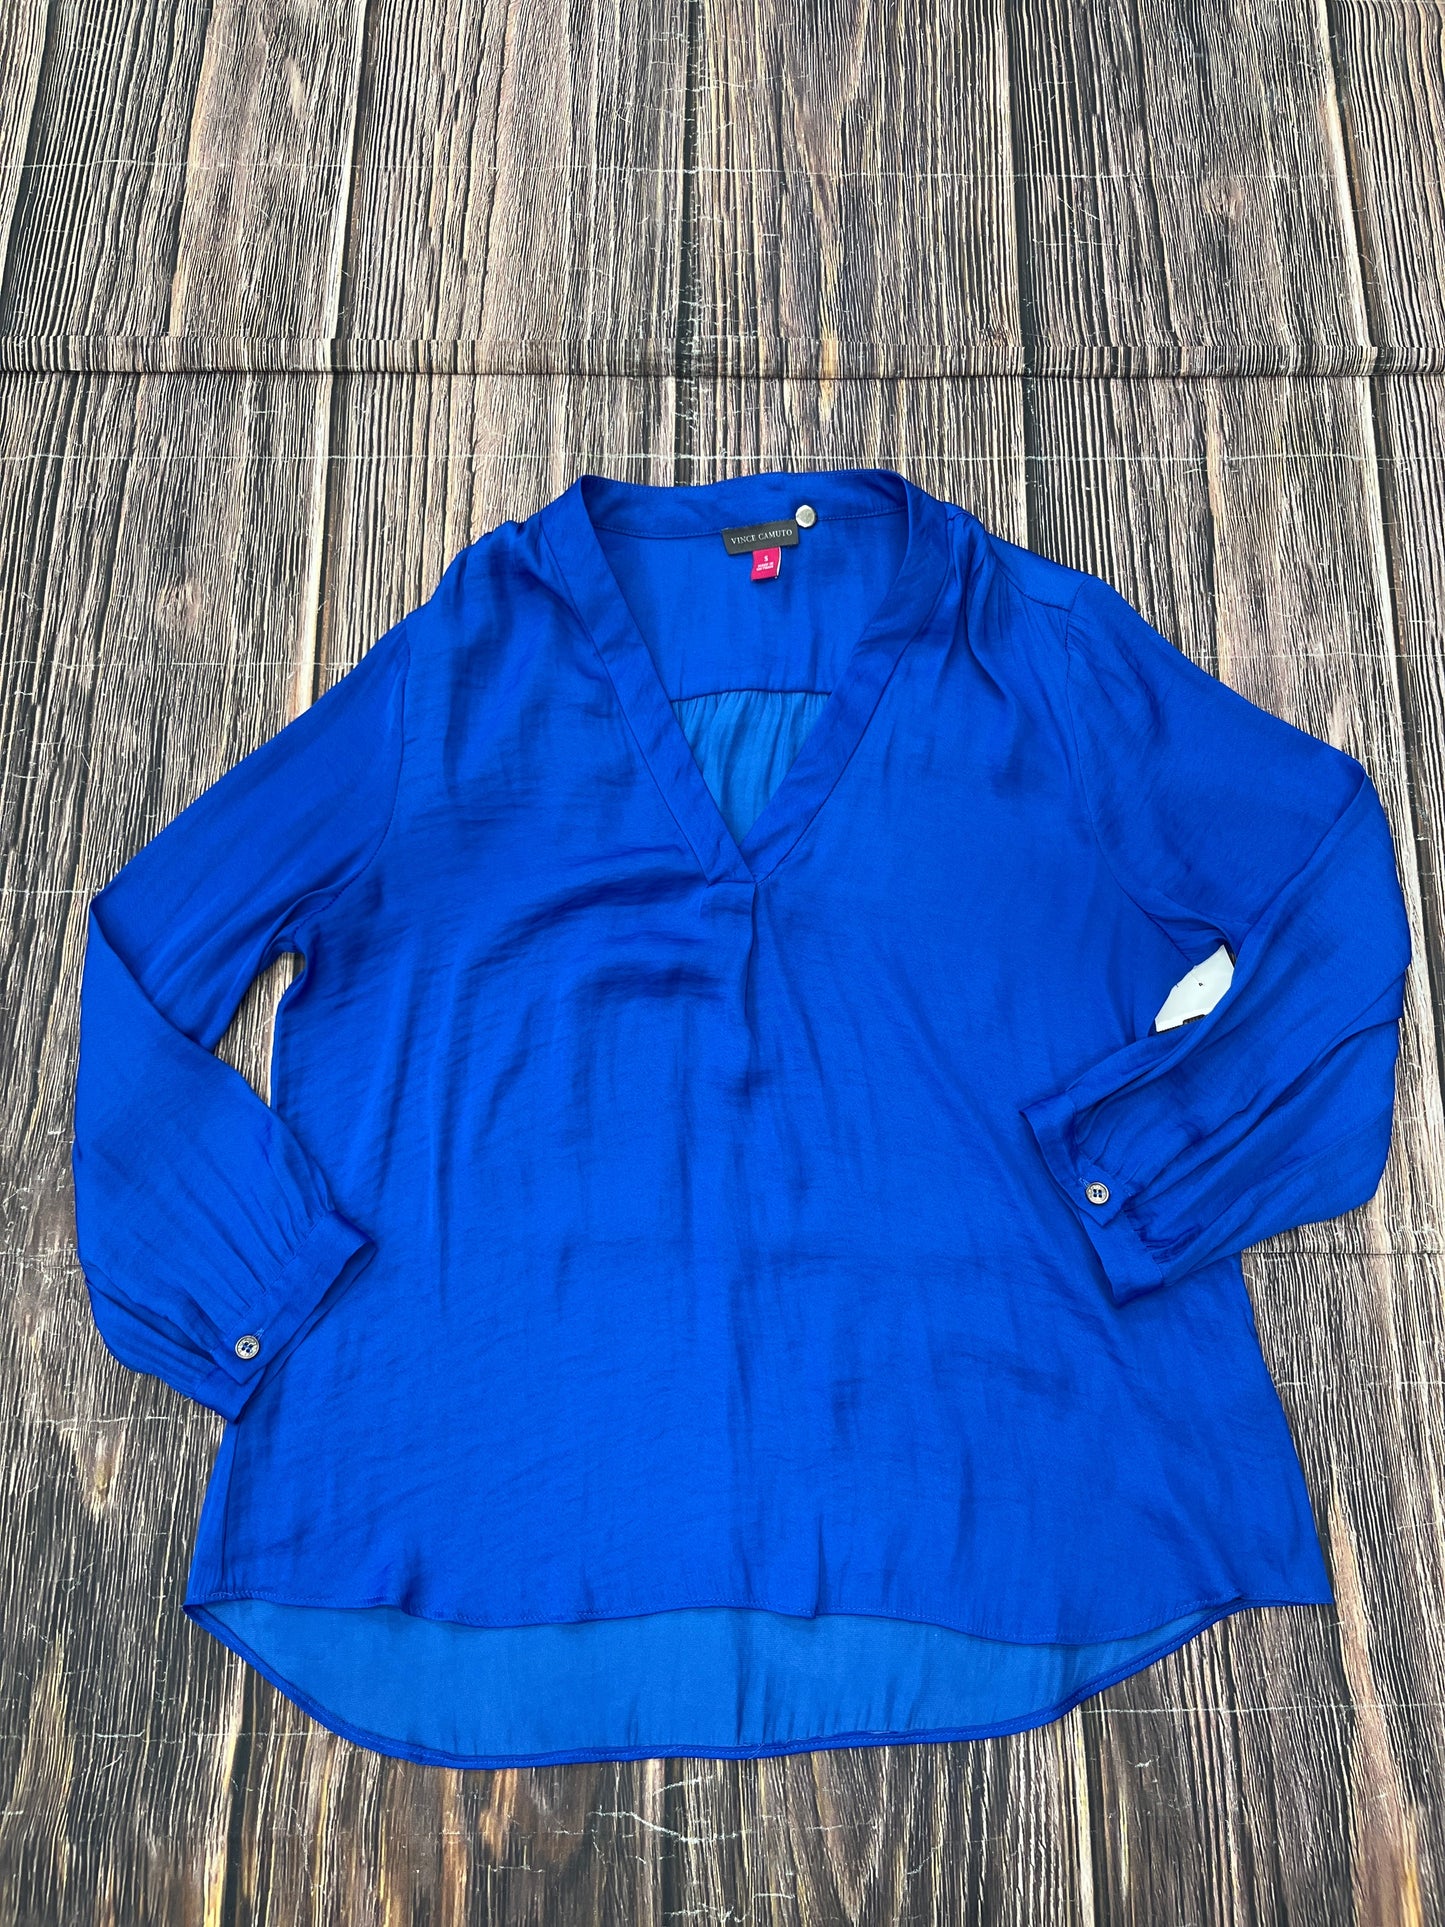 Blue Top Long Sleeve Vince Camuto, Size S